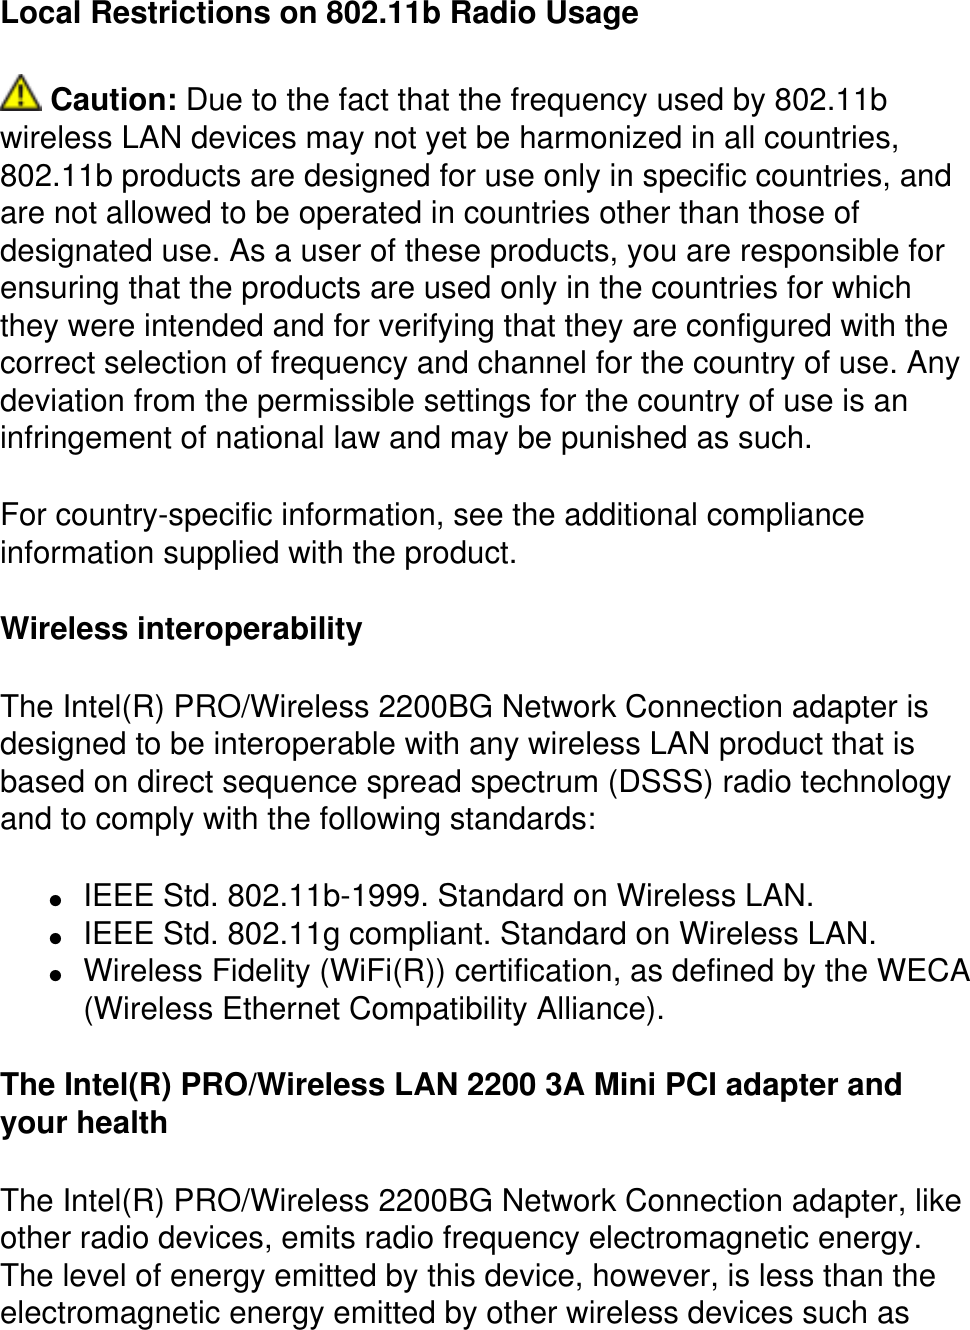 Local Restrictions on 802.11b Radio Usage Caution: Due to the fact that the frequency used by 802.11b wireless LAN devices may not yet be harmonized in all countries, 802.11b products are designed for use only in specific countries, and are not allowed to be operated in countries other than those of designated use. As a user of these products, you are responsible for ensuring that the products are used only in the countries for which they were intended and for verifying that they are configured with the correct selection of frequency and channel for the country of use. Any deviation from the permissible settings for the country of use is an infringement of national law and may be punished as such.For country-specific information, see the additional compliance information supplied with the product.Wireless interoperabilityThe Intel(R) PRO/Wireless 2200BG Network Connection adapter is designed to be interoperable with any wireless LAN product that is based on direct sequence spread spectrum (DSSS) radio technology and to comply with the following standards:●     IEEE Std. 802.11b-1999. Standard on Wireless LAN. ●     IEEE Std. 802.11g compliant. Standard on Wireless LAN. ●     Wireless Fidelity (WiFi(R)) certification, as defined by the WECA (Wireless Ethernet Compatibility Alliance). The Intel(R) PRO/Wireless LAN 2200 3A Mini PCI adapter and your healthThe Intel(R) PRO/Wireless 2200BG Network Connection adapter, like other radio devices, emits radio frequency electromagnetic energy. The level of energy emitted by this device, however, is less than the electromagnetic energy emitted by other wireless devices such as 